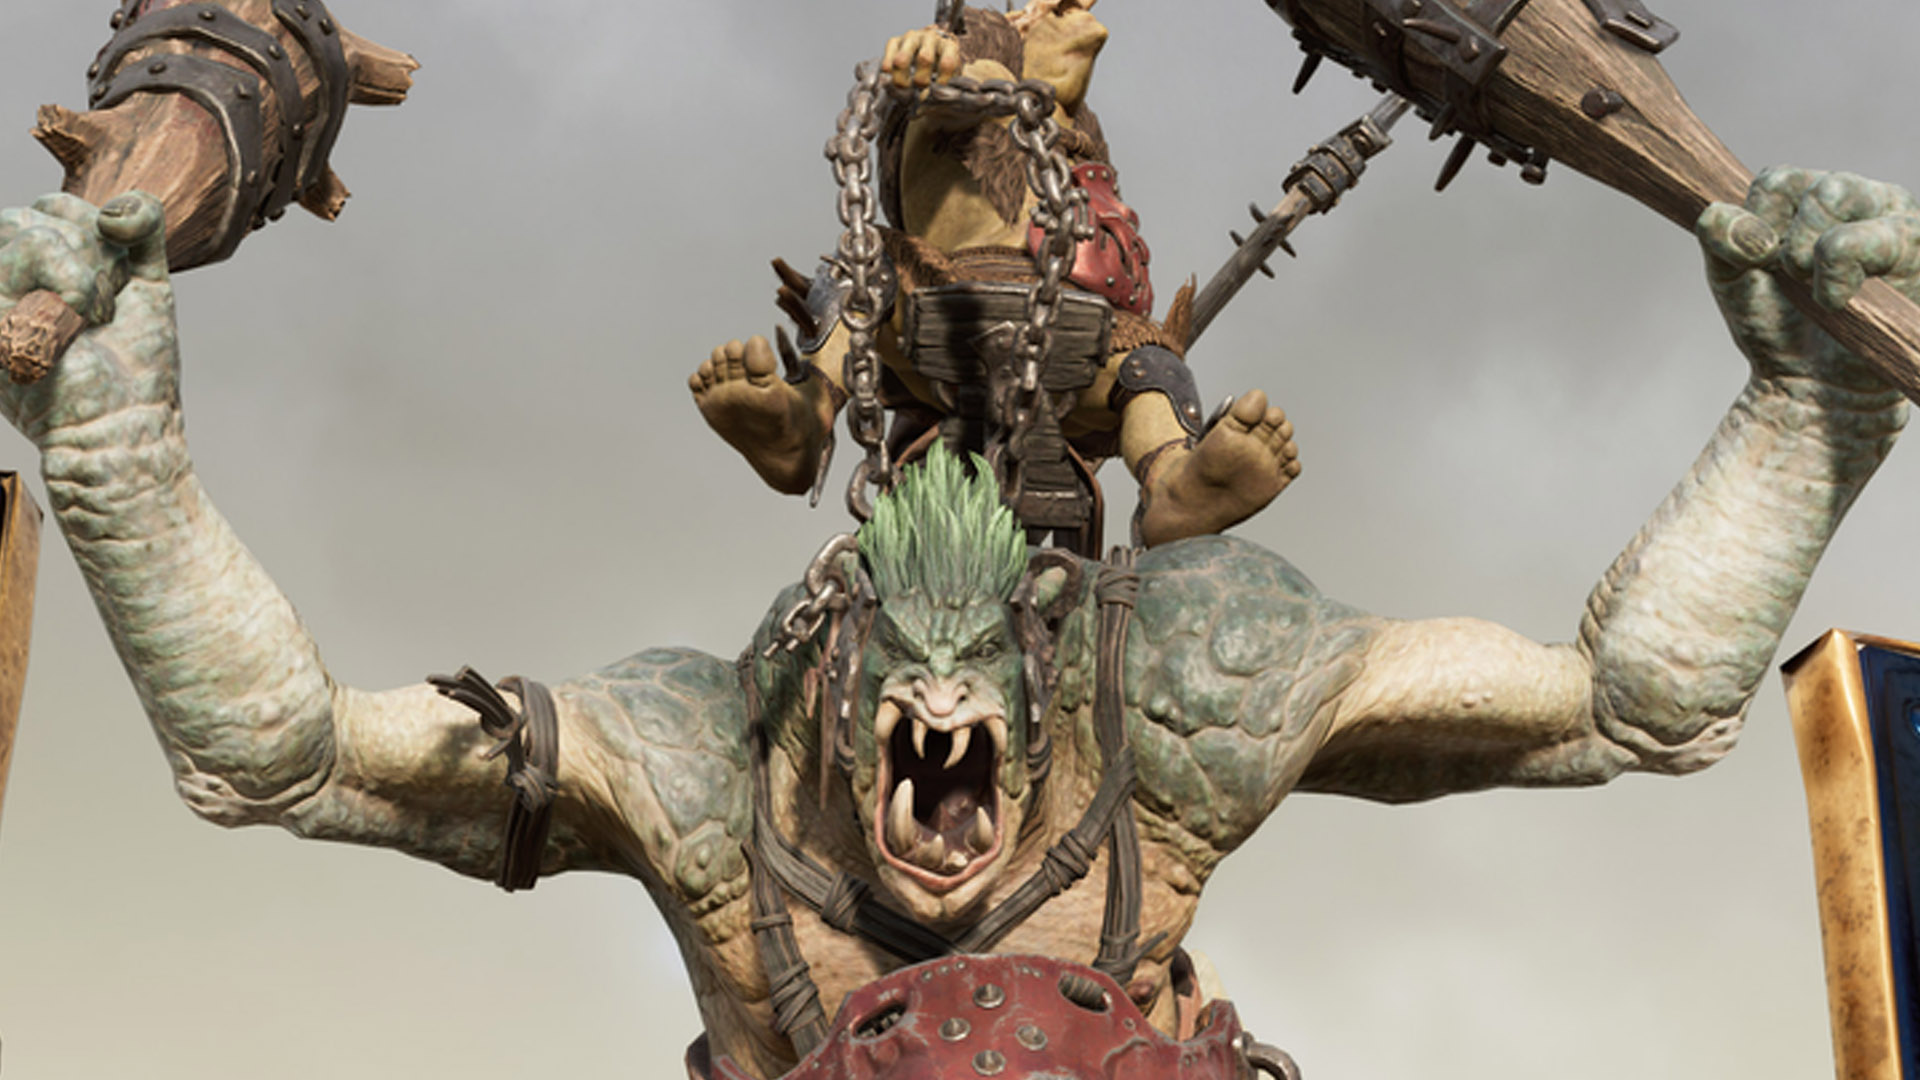 Save 90% on Warhammer games and claim free stuff in huge new sales